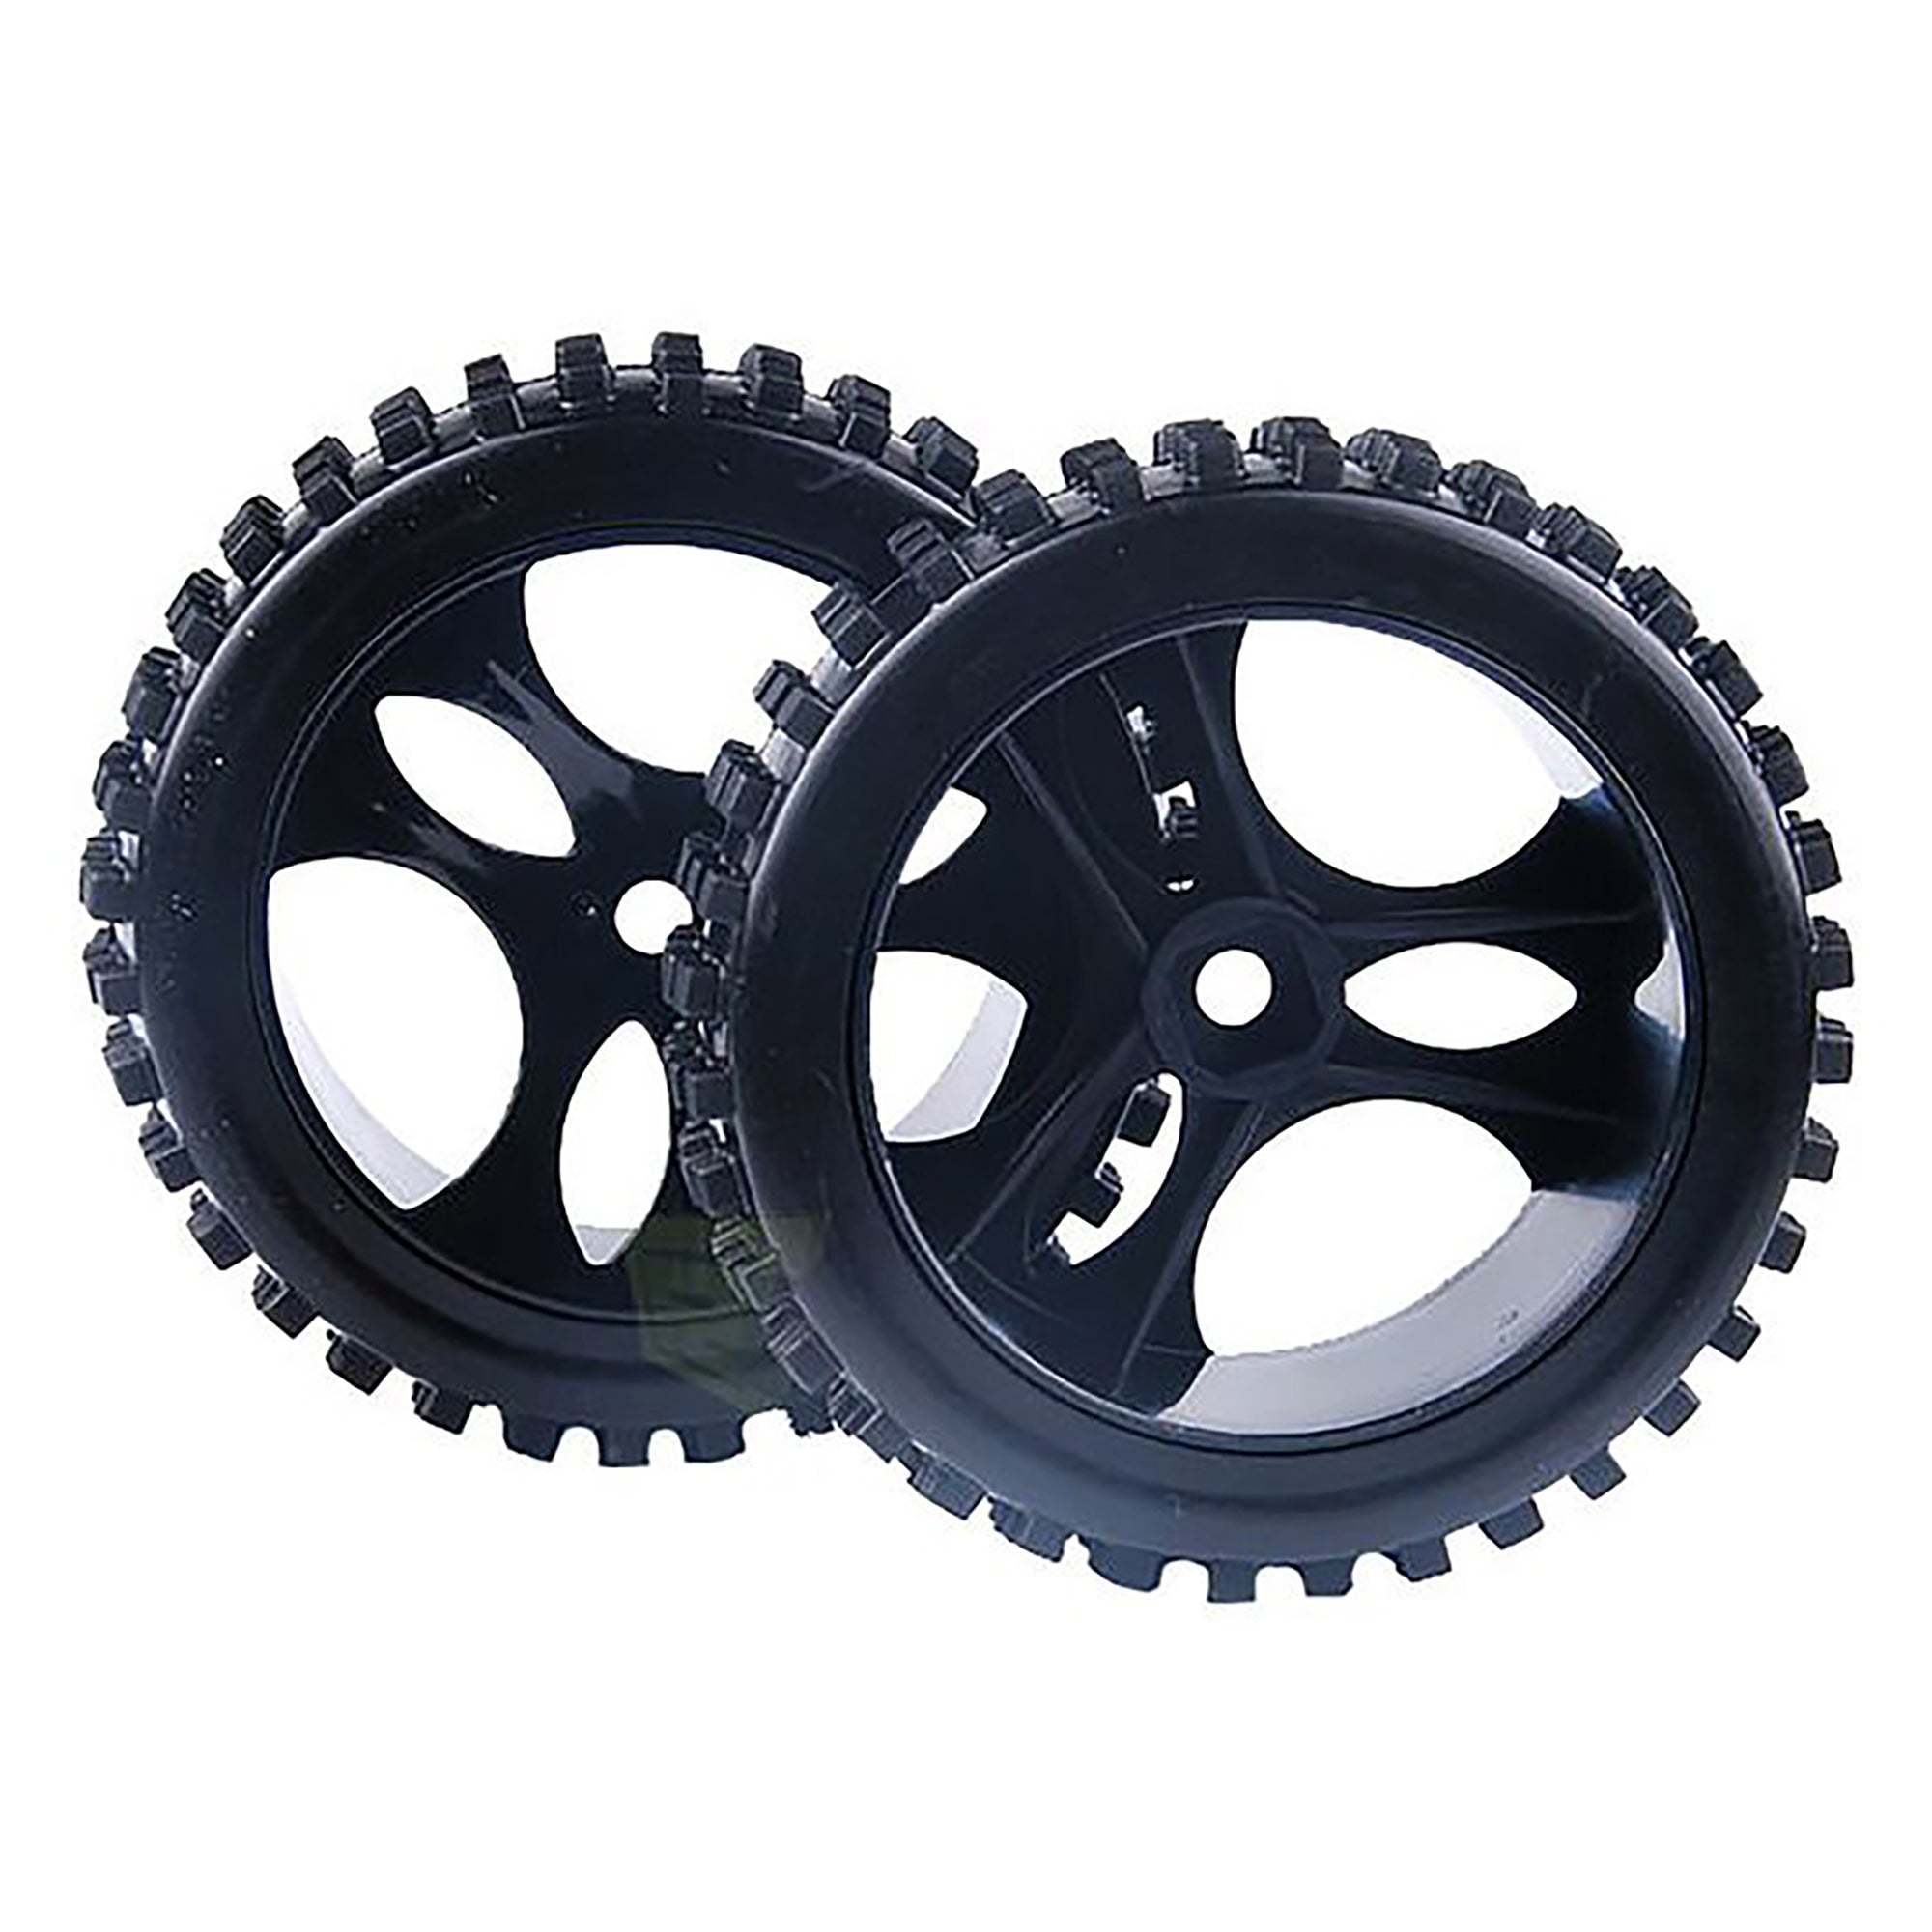 HSP Racing 07155 Wheels Complete(for Buggy only) (Pack of 2)